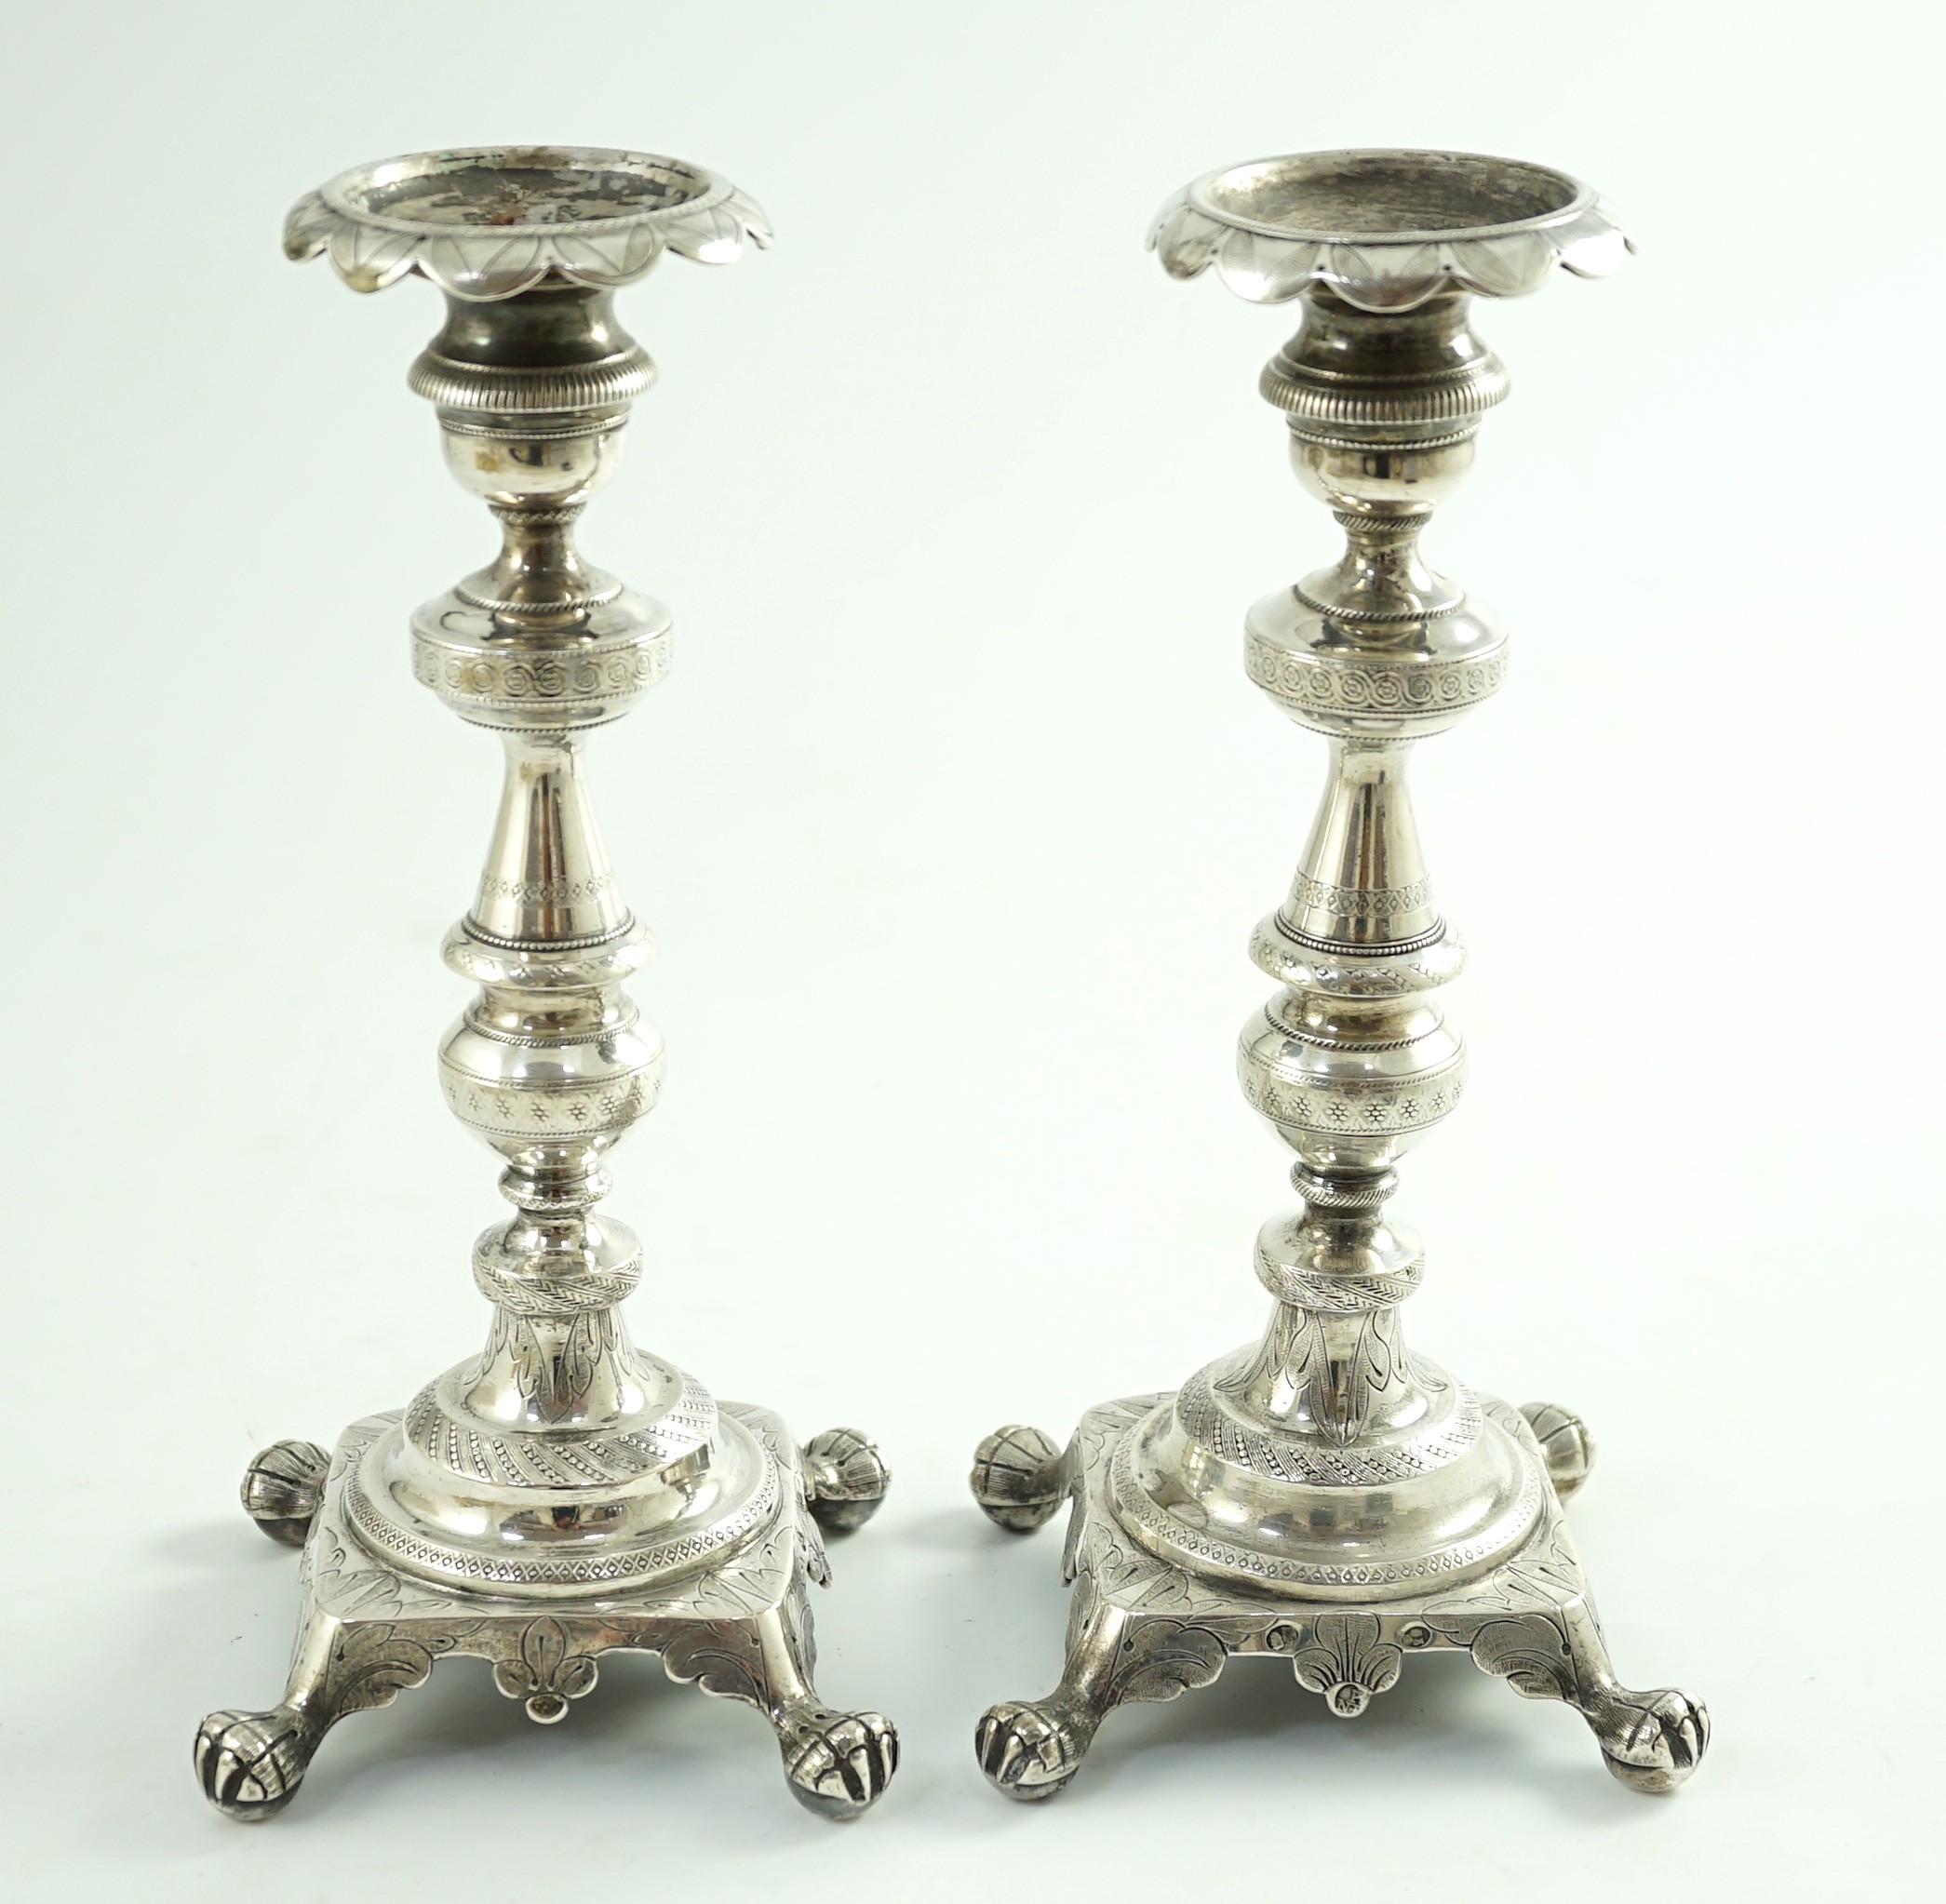 A pair of early 19th century Portuguese silver candlesticks